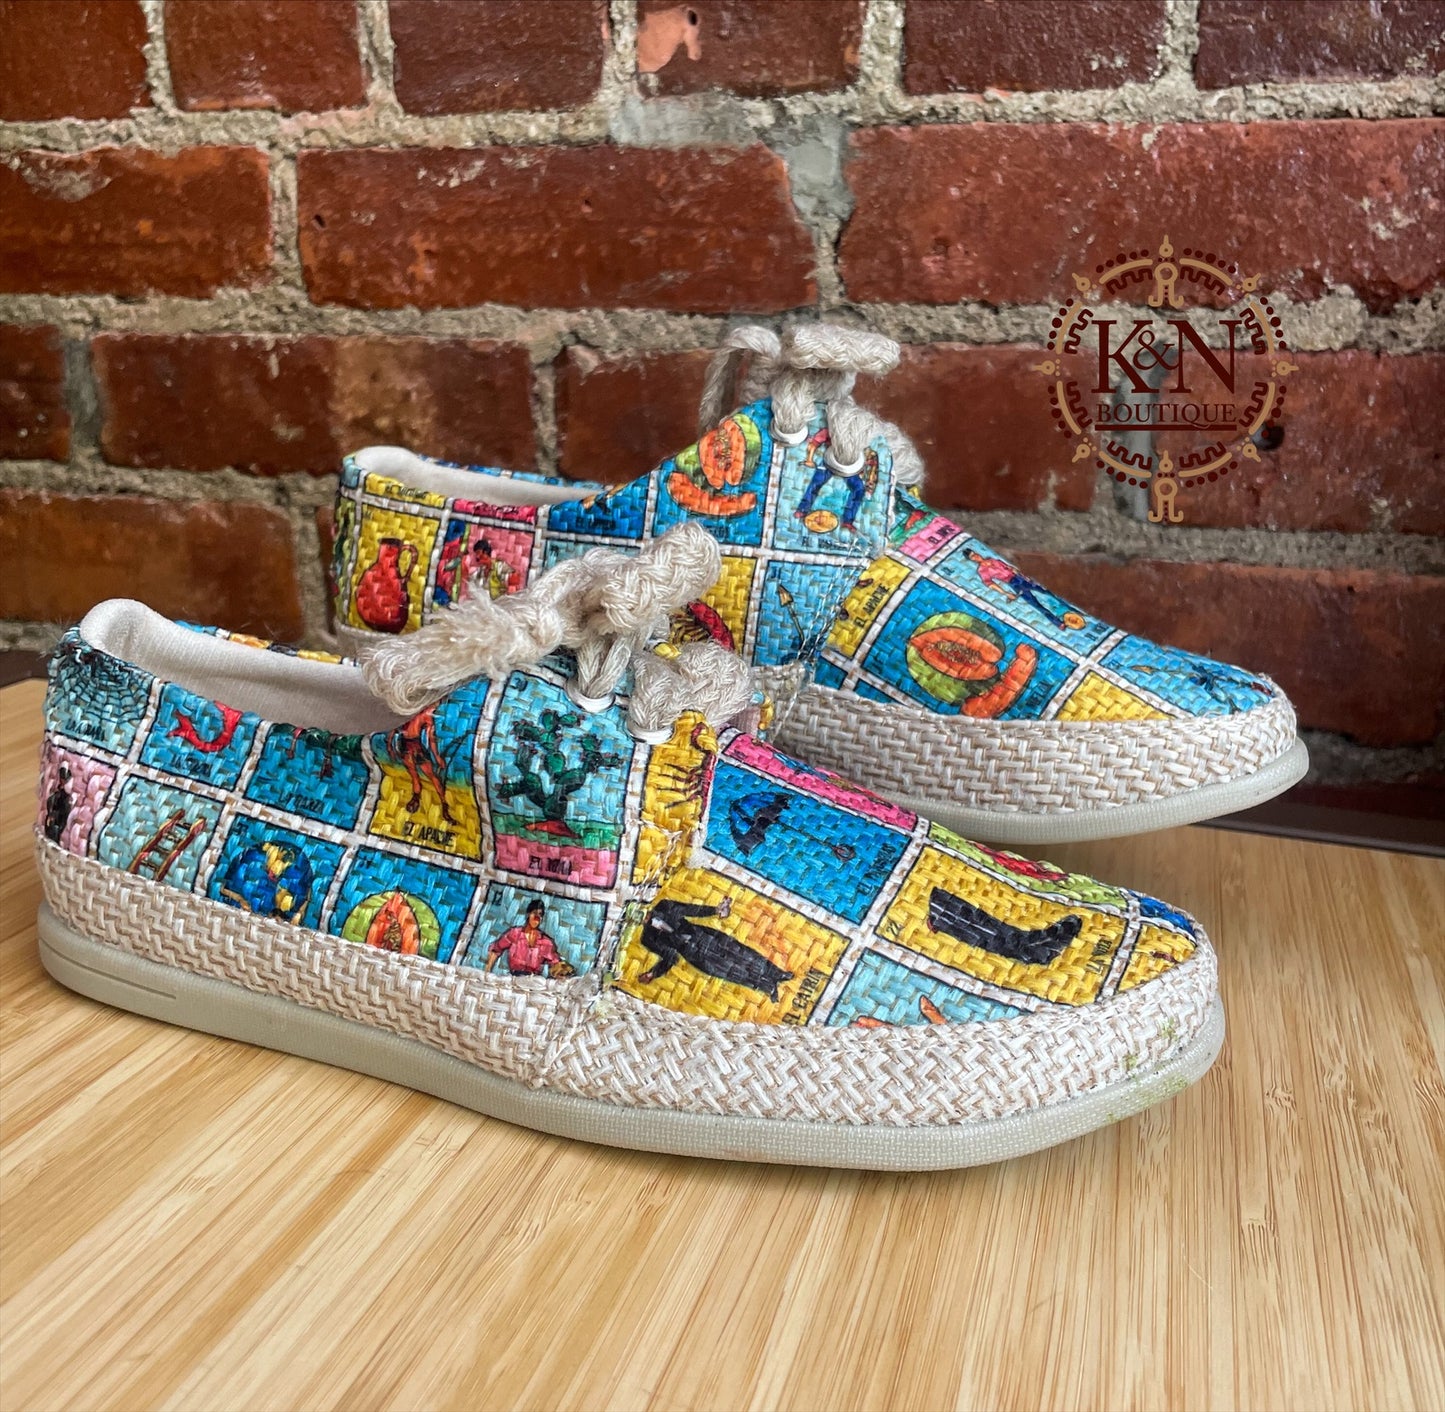 Loteria shoes